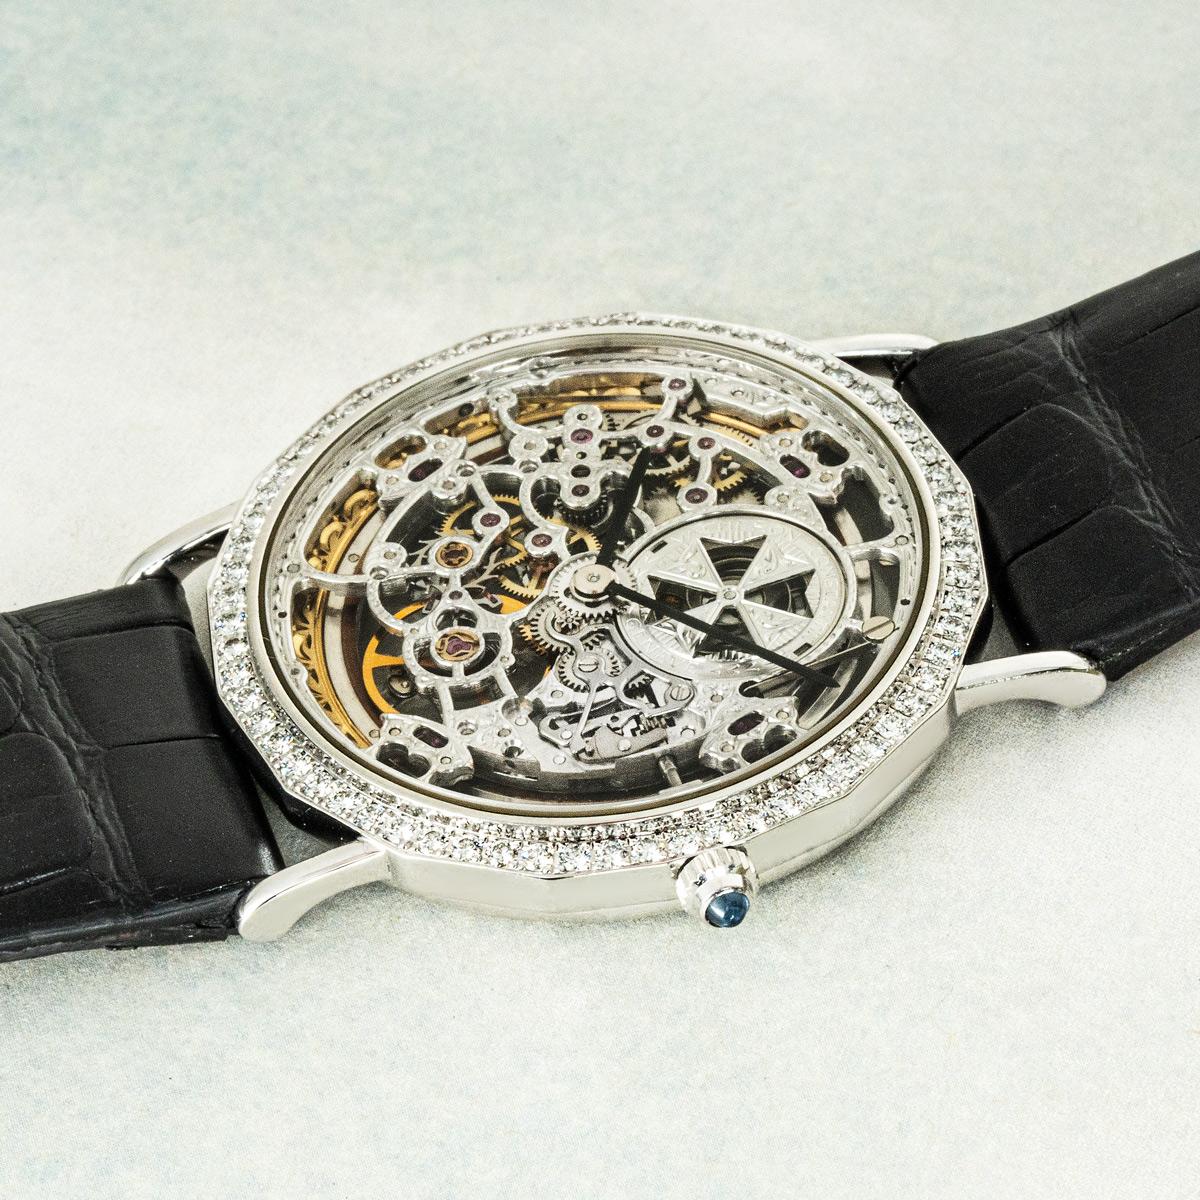 A white gold Patrimony Squelette by Vacheron Constantin from their Les Complications collection. Features a skeleton dial complemented by a diamond set white gold bezel. Fitted with sapphire crystal and a manual wind movement which can be seen via